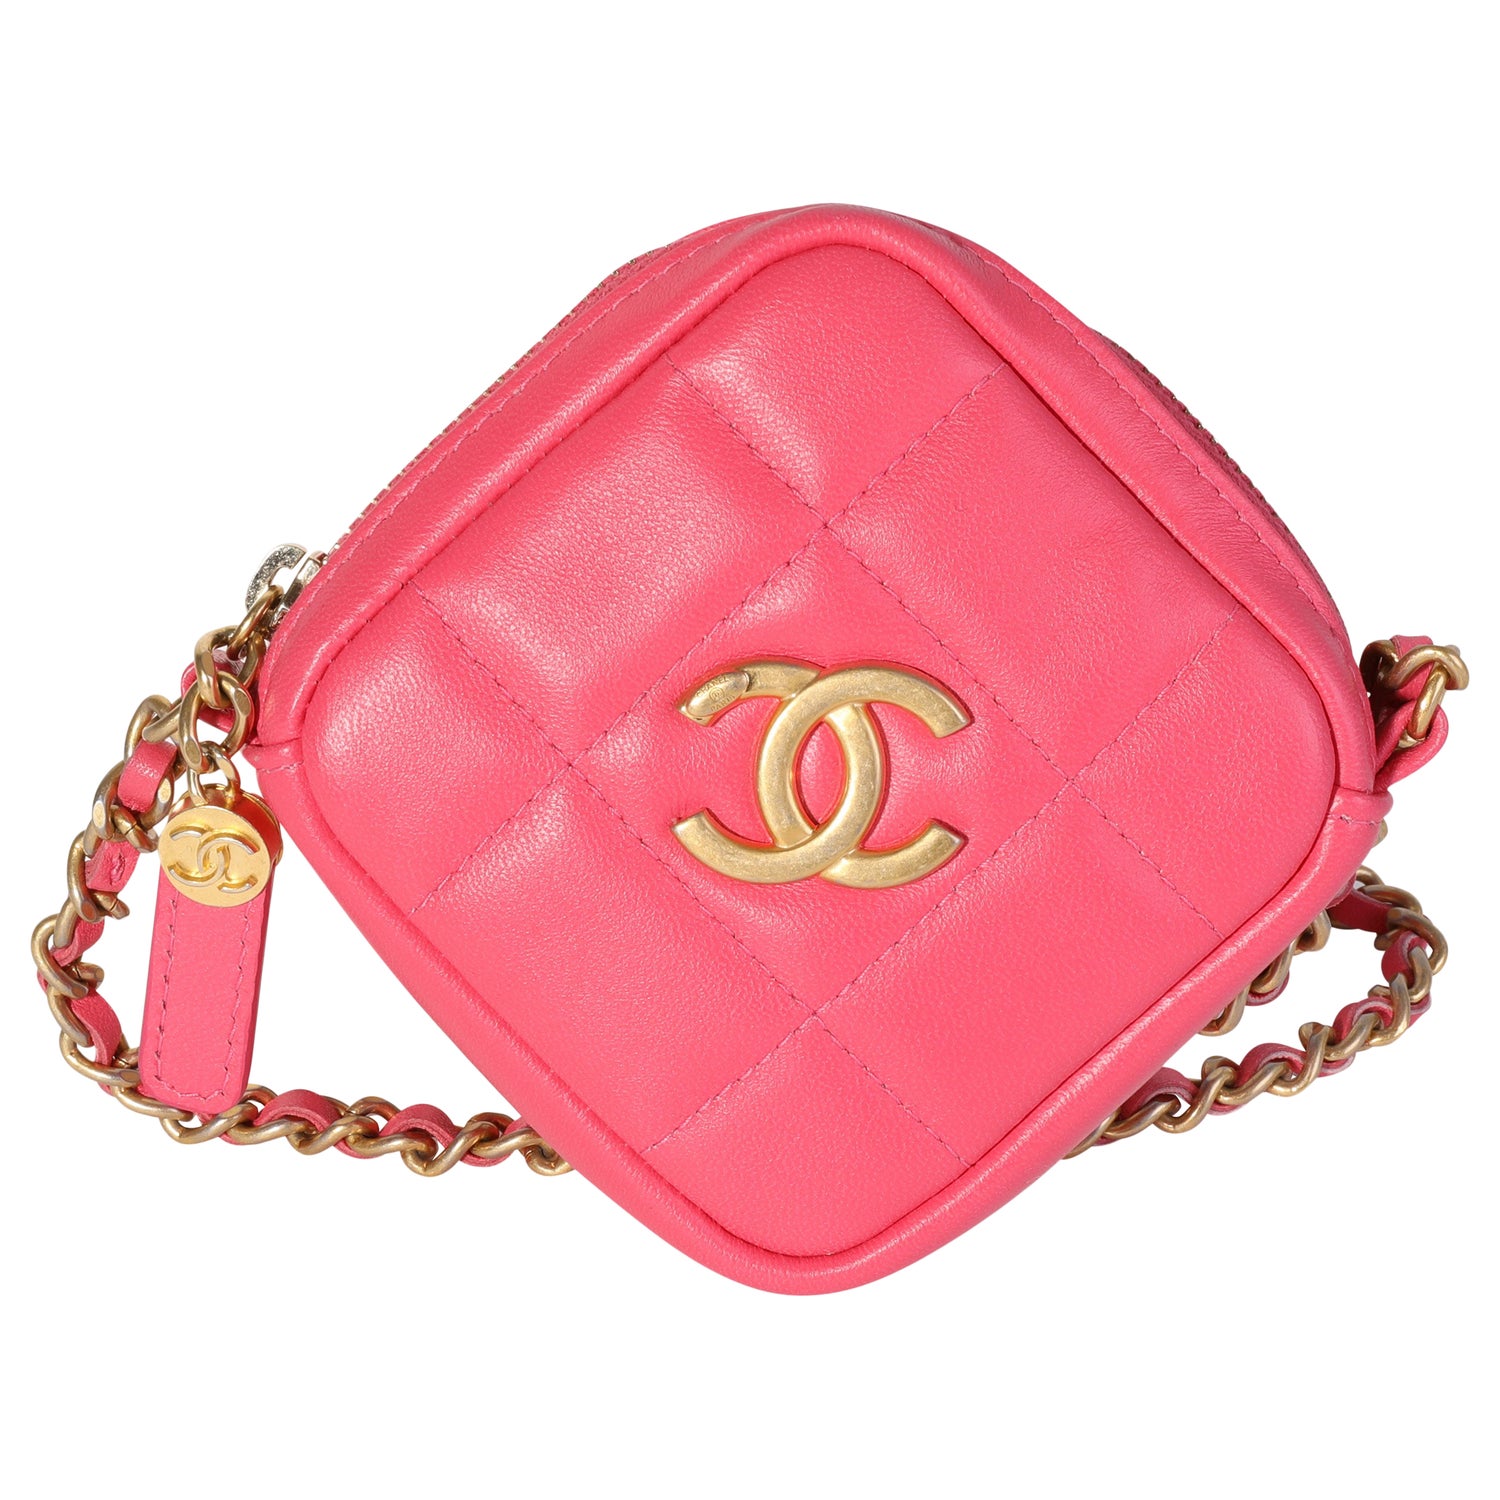 Pink Chanel Bags - 31 For Sale on 1stDibs  pink chanel tote, pink chanel  bag price, chanel vintage pink bag